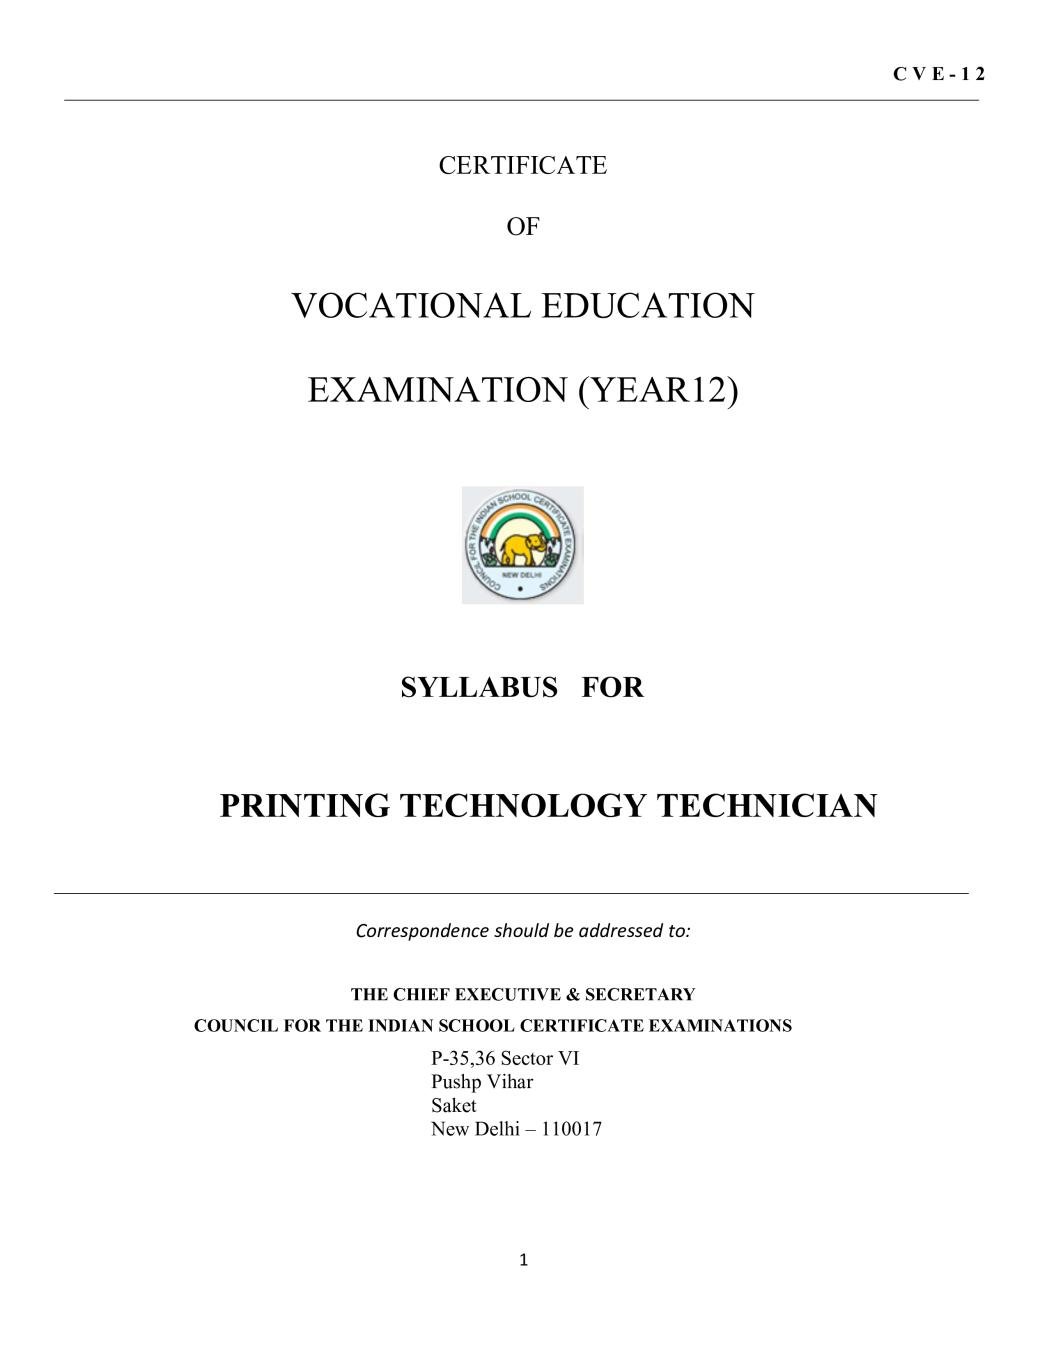 ISC Class 12 Print Technology Technician Syllabus (Vocational Course) - Page 1